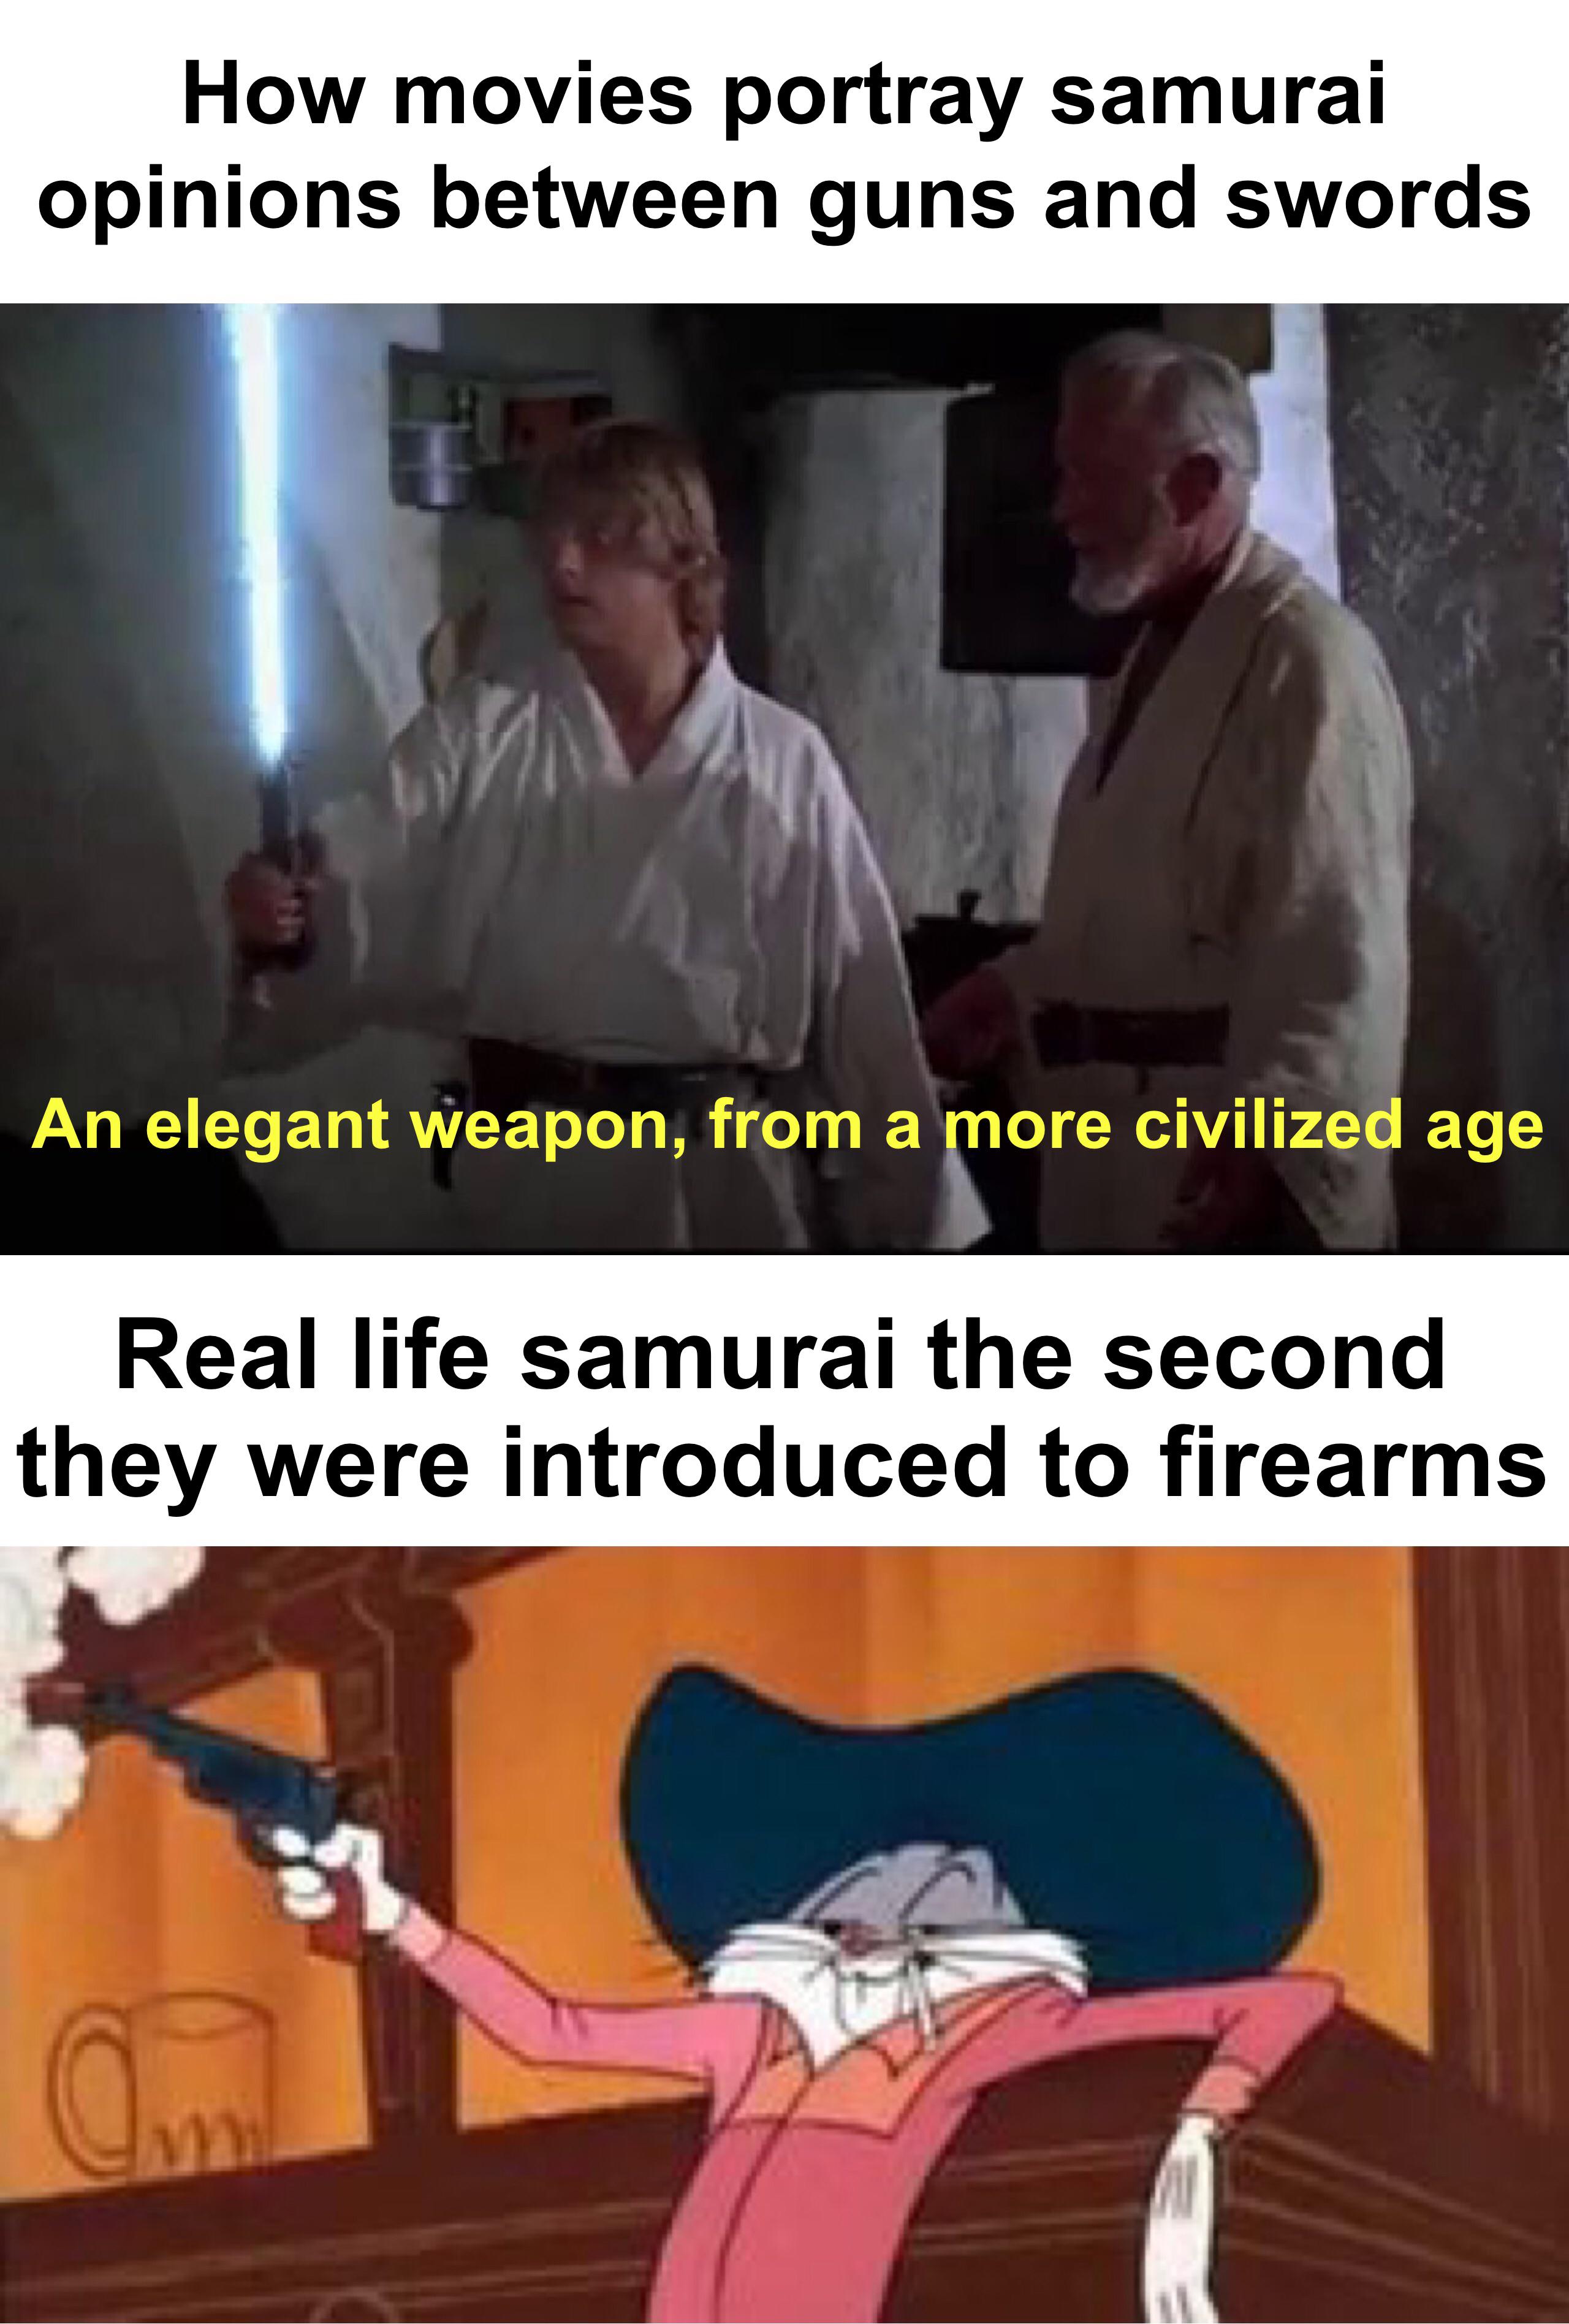 How movies portray samurai opinions between guns and swords An elegant weapon, from a more civilized age Real life samurai the second they were introduced to firearms